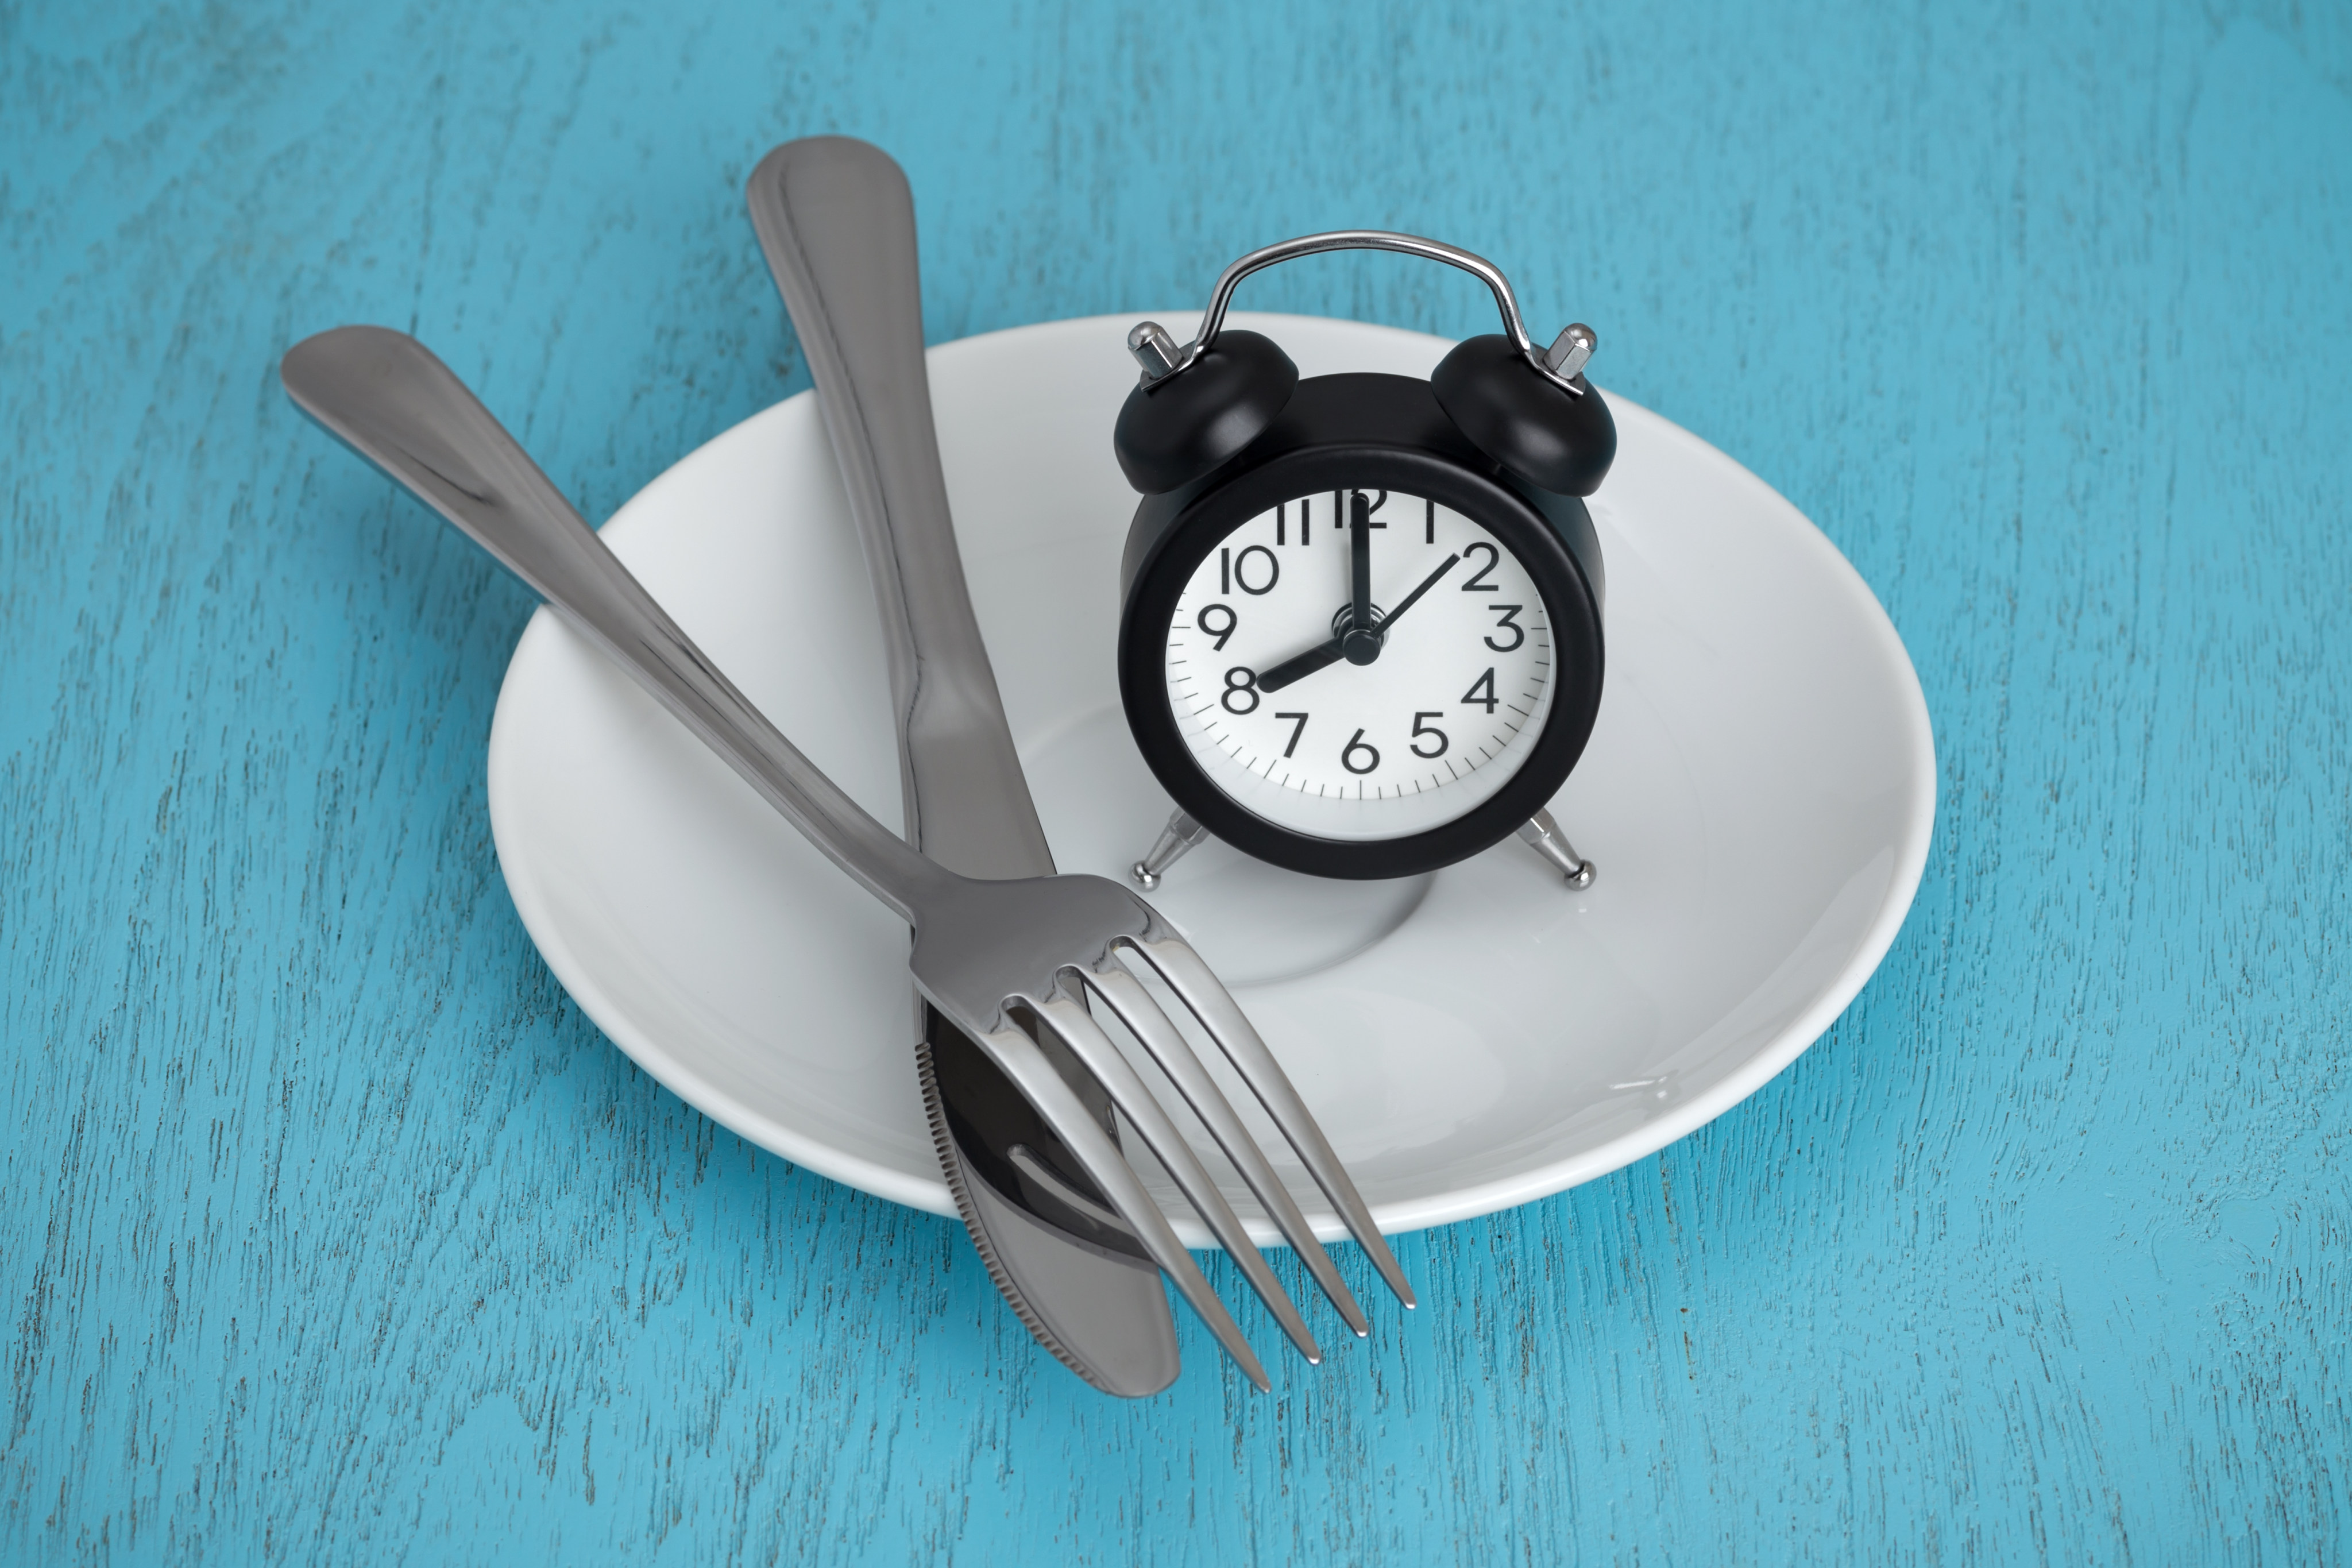 Intermittent fasting might promote brain health and help protect against diseases such as Alzheimer’s and Parkinson’s, according to neuroscientist Mark Mattson. Photo: Getty Images